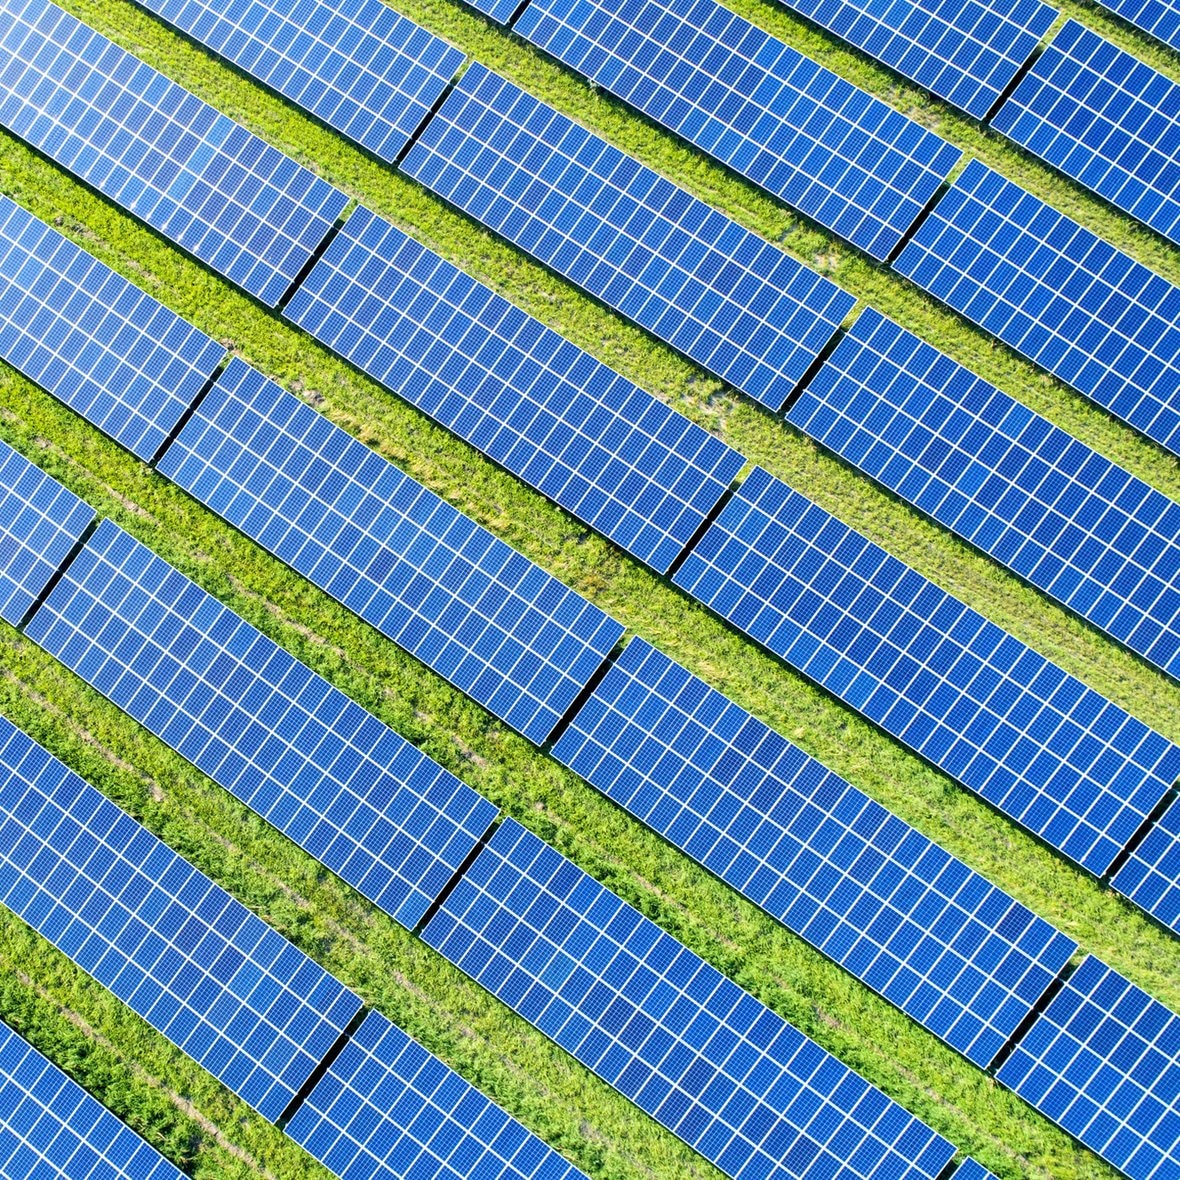 Rows of solar panels with grass growing in between them.